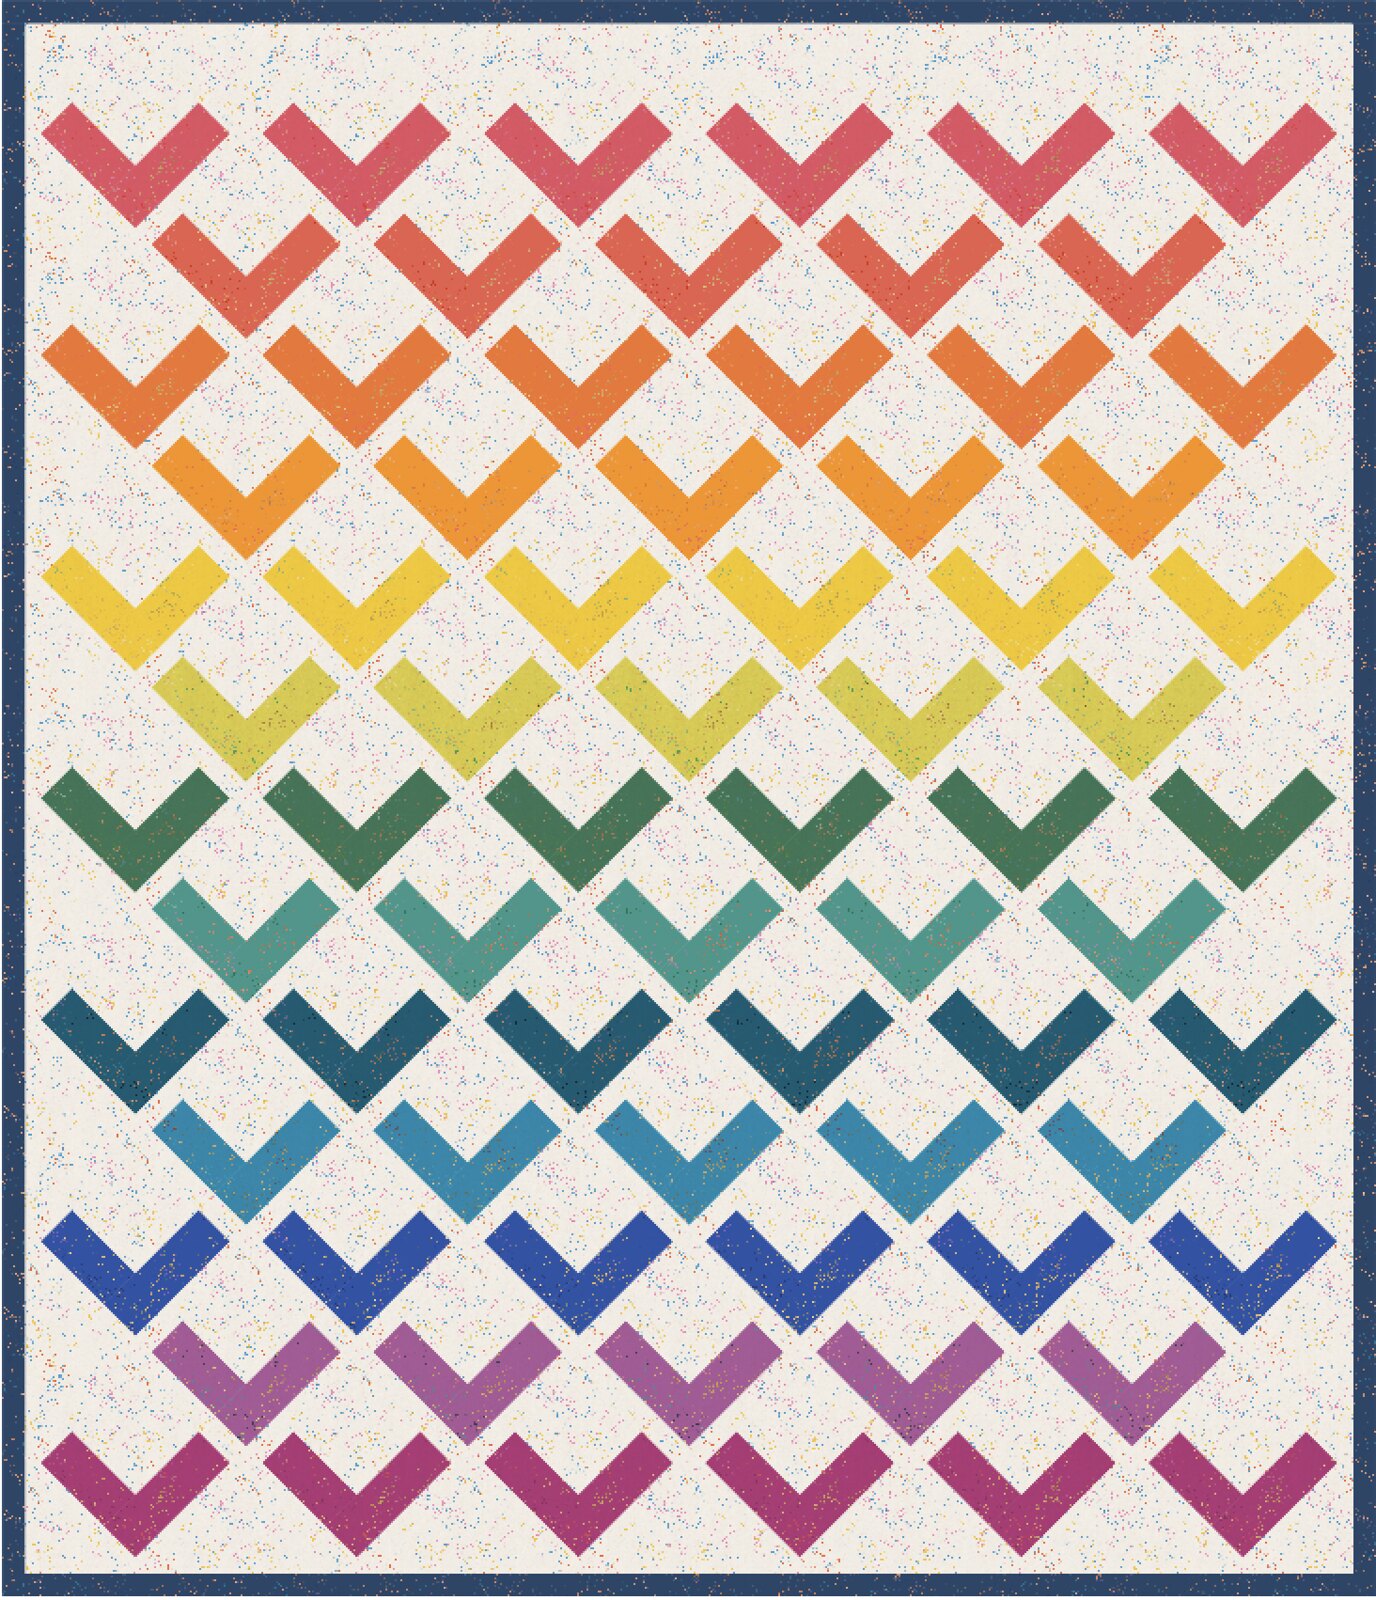 A Rainbow Freya Quilt - Kitchen Table Quilting